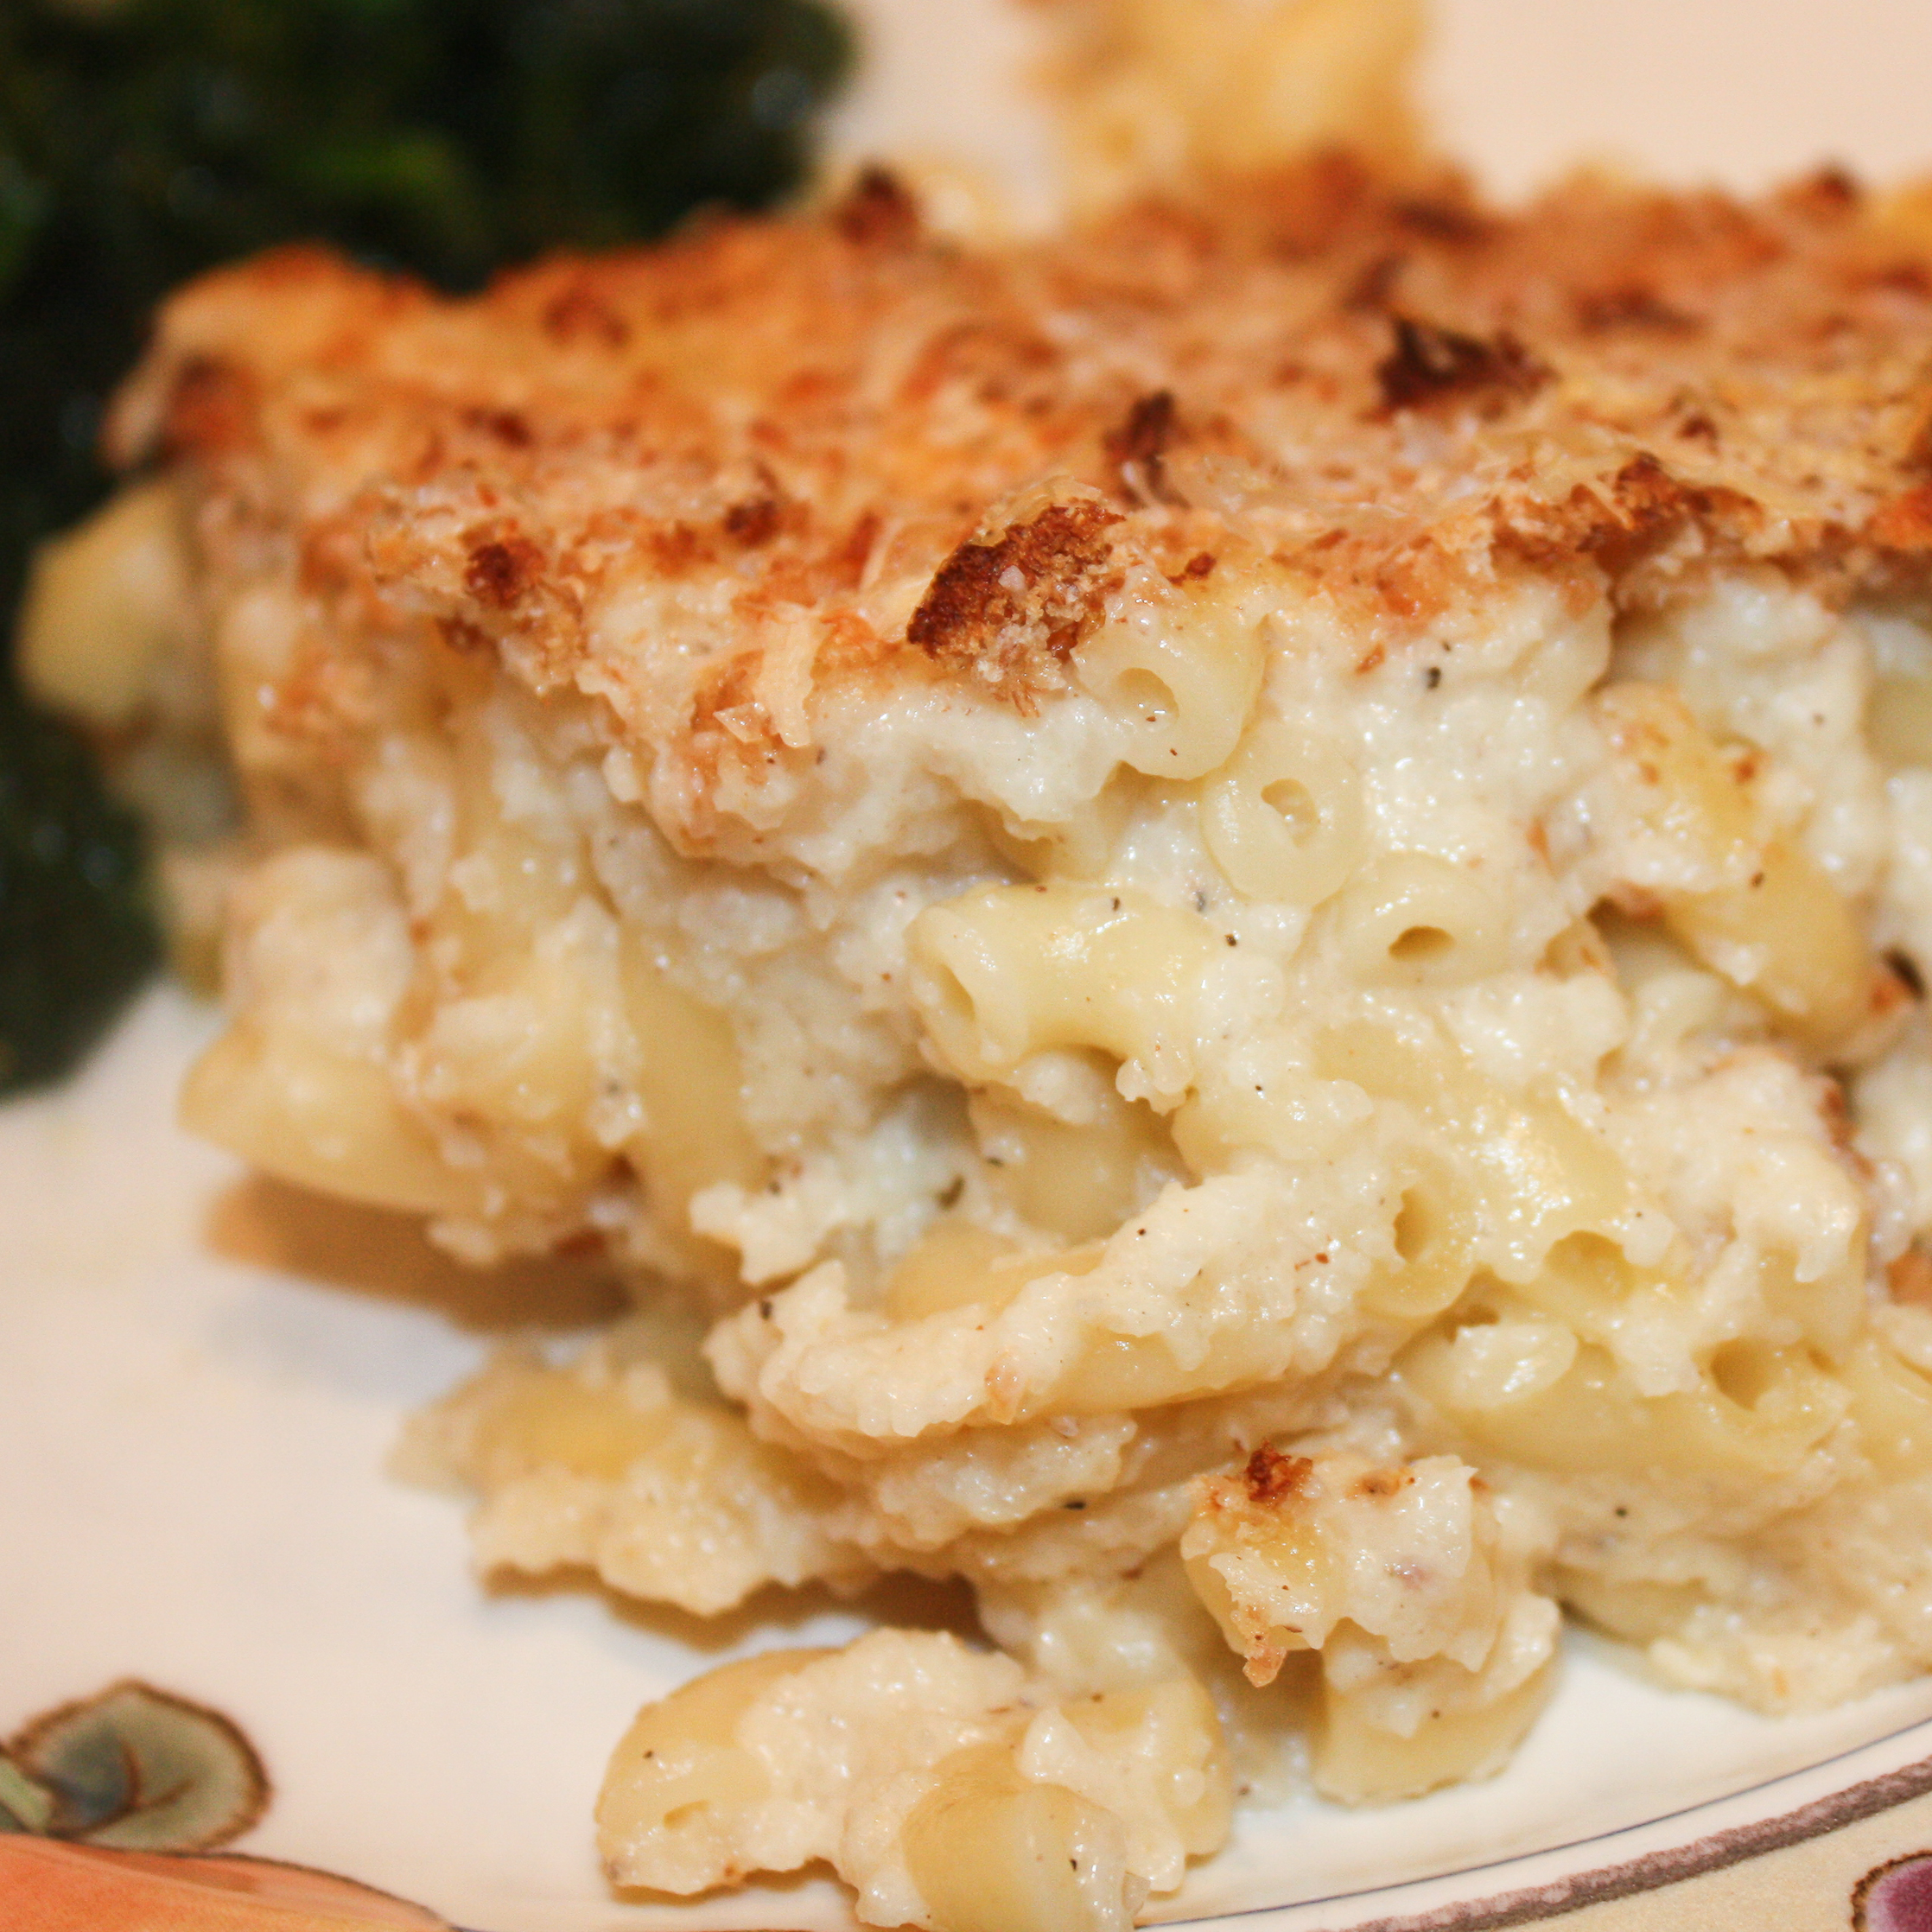 Healthy and Light Macaroni and Cheese tastes decadent but isn't thanks to a surprise ingredient. There's no milk in this recipe yet it has a creamy sauce thanks to the surprise ingredient, cauliflower.